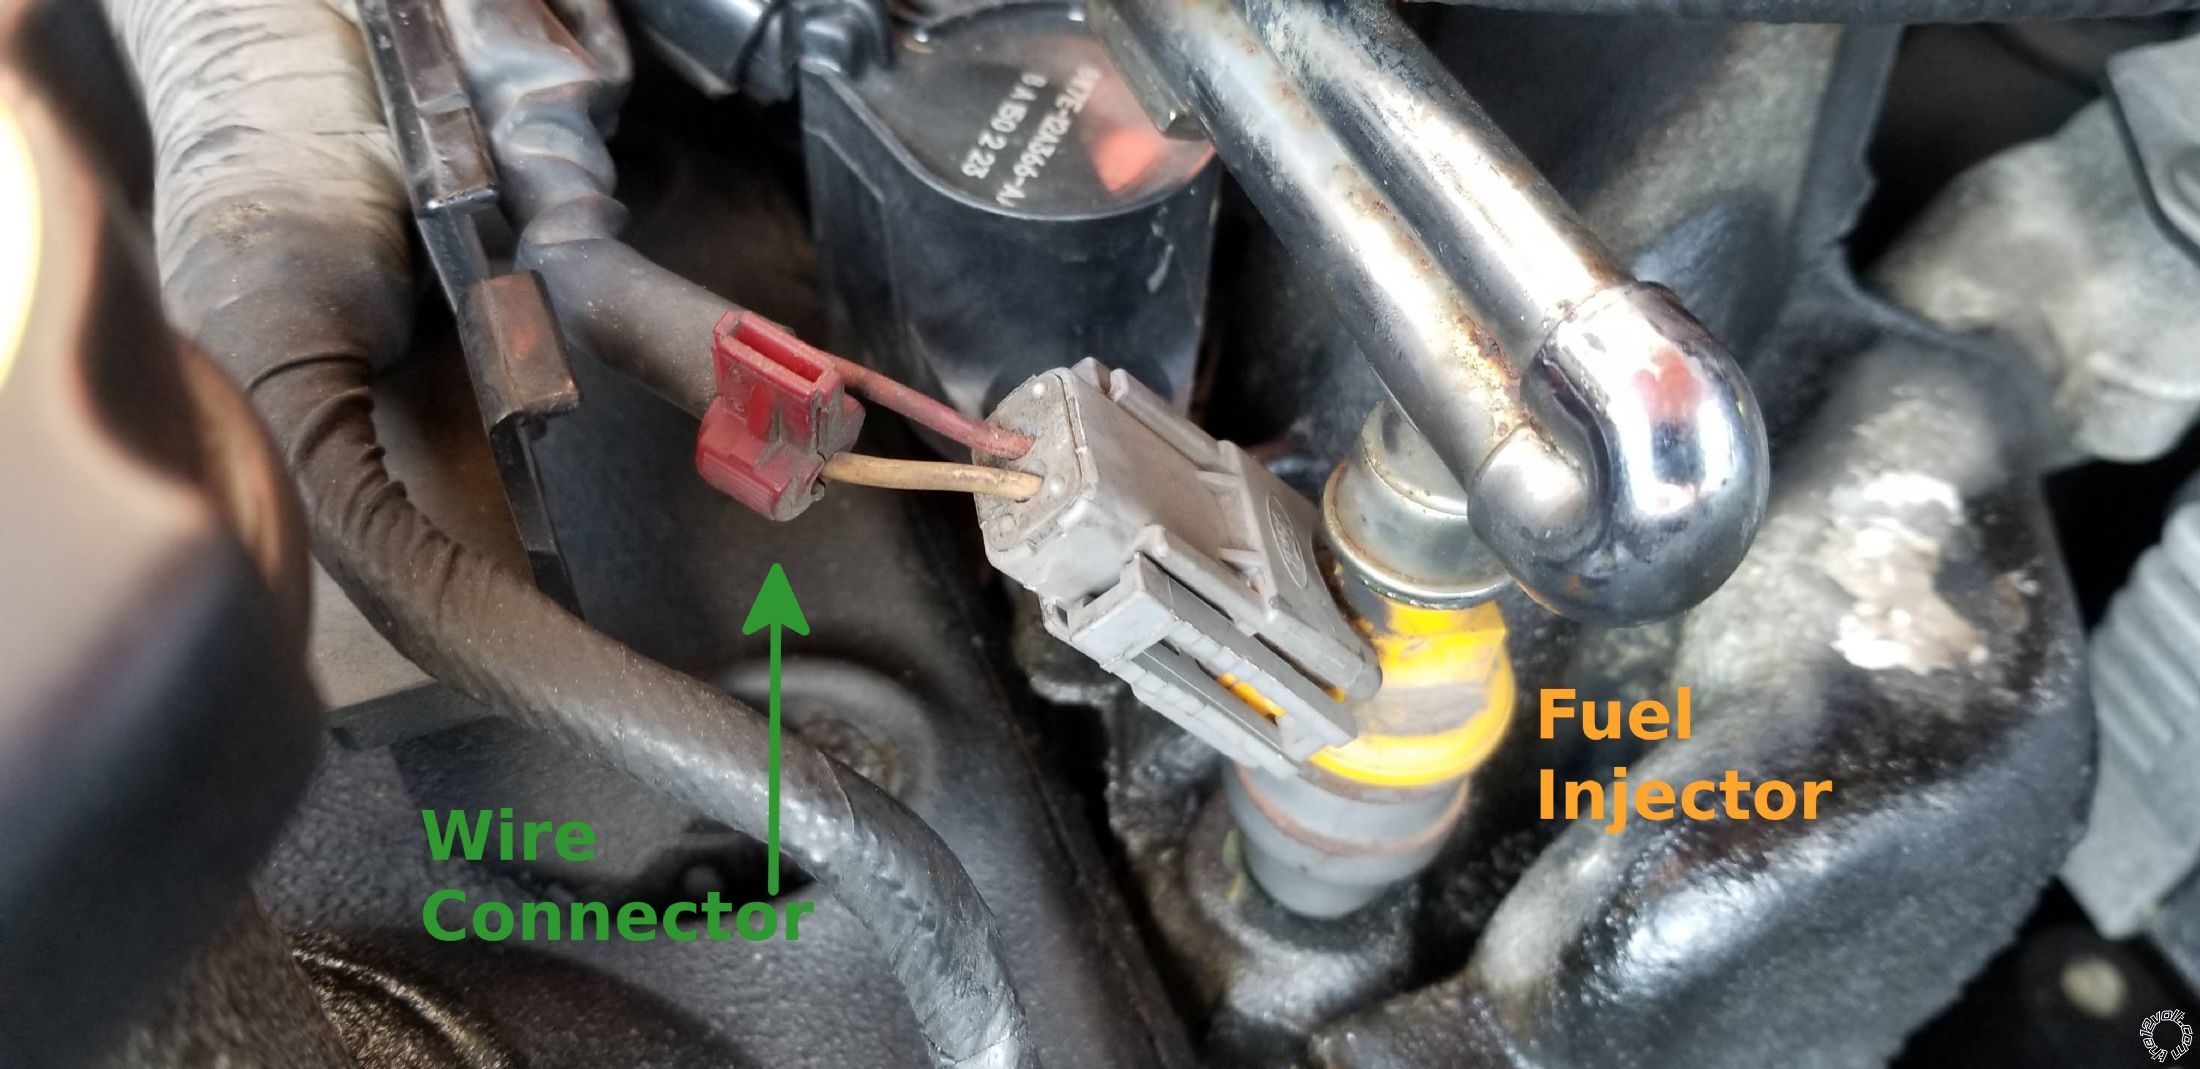 1999 Ford F-150, Python 1500HF Remote Start Won’t Work After Engine Repair -- posted image.